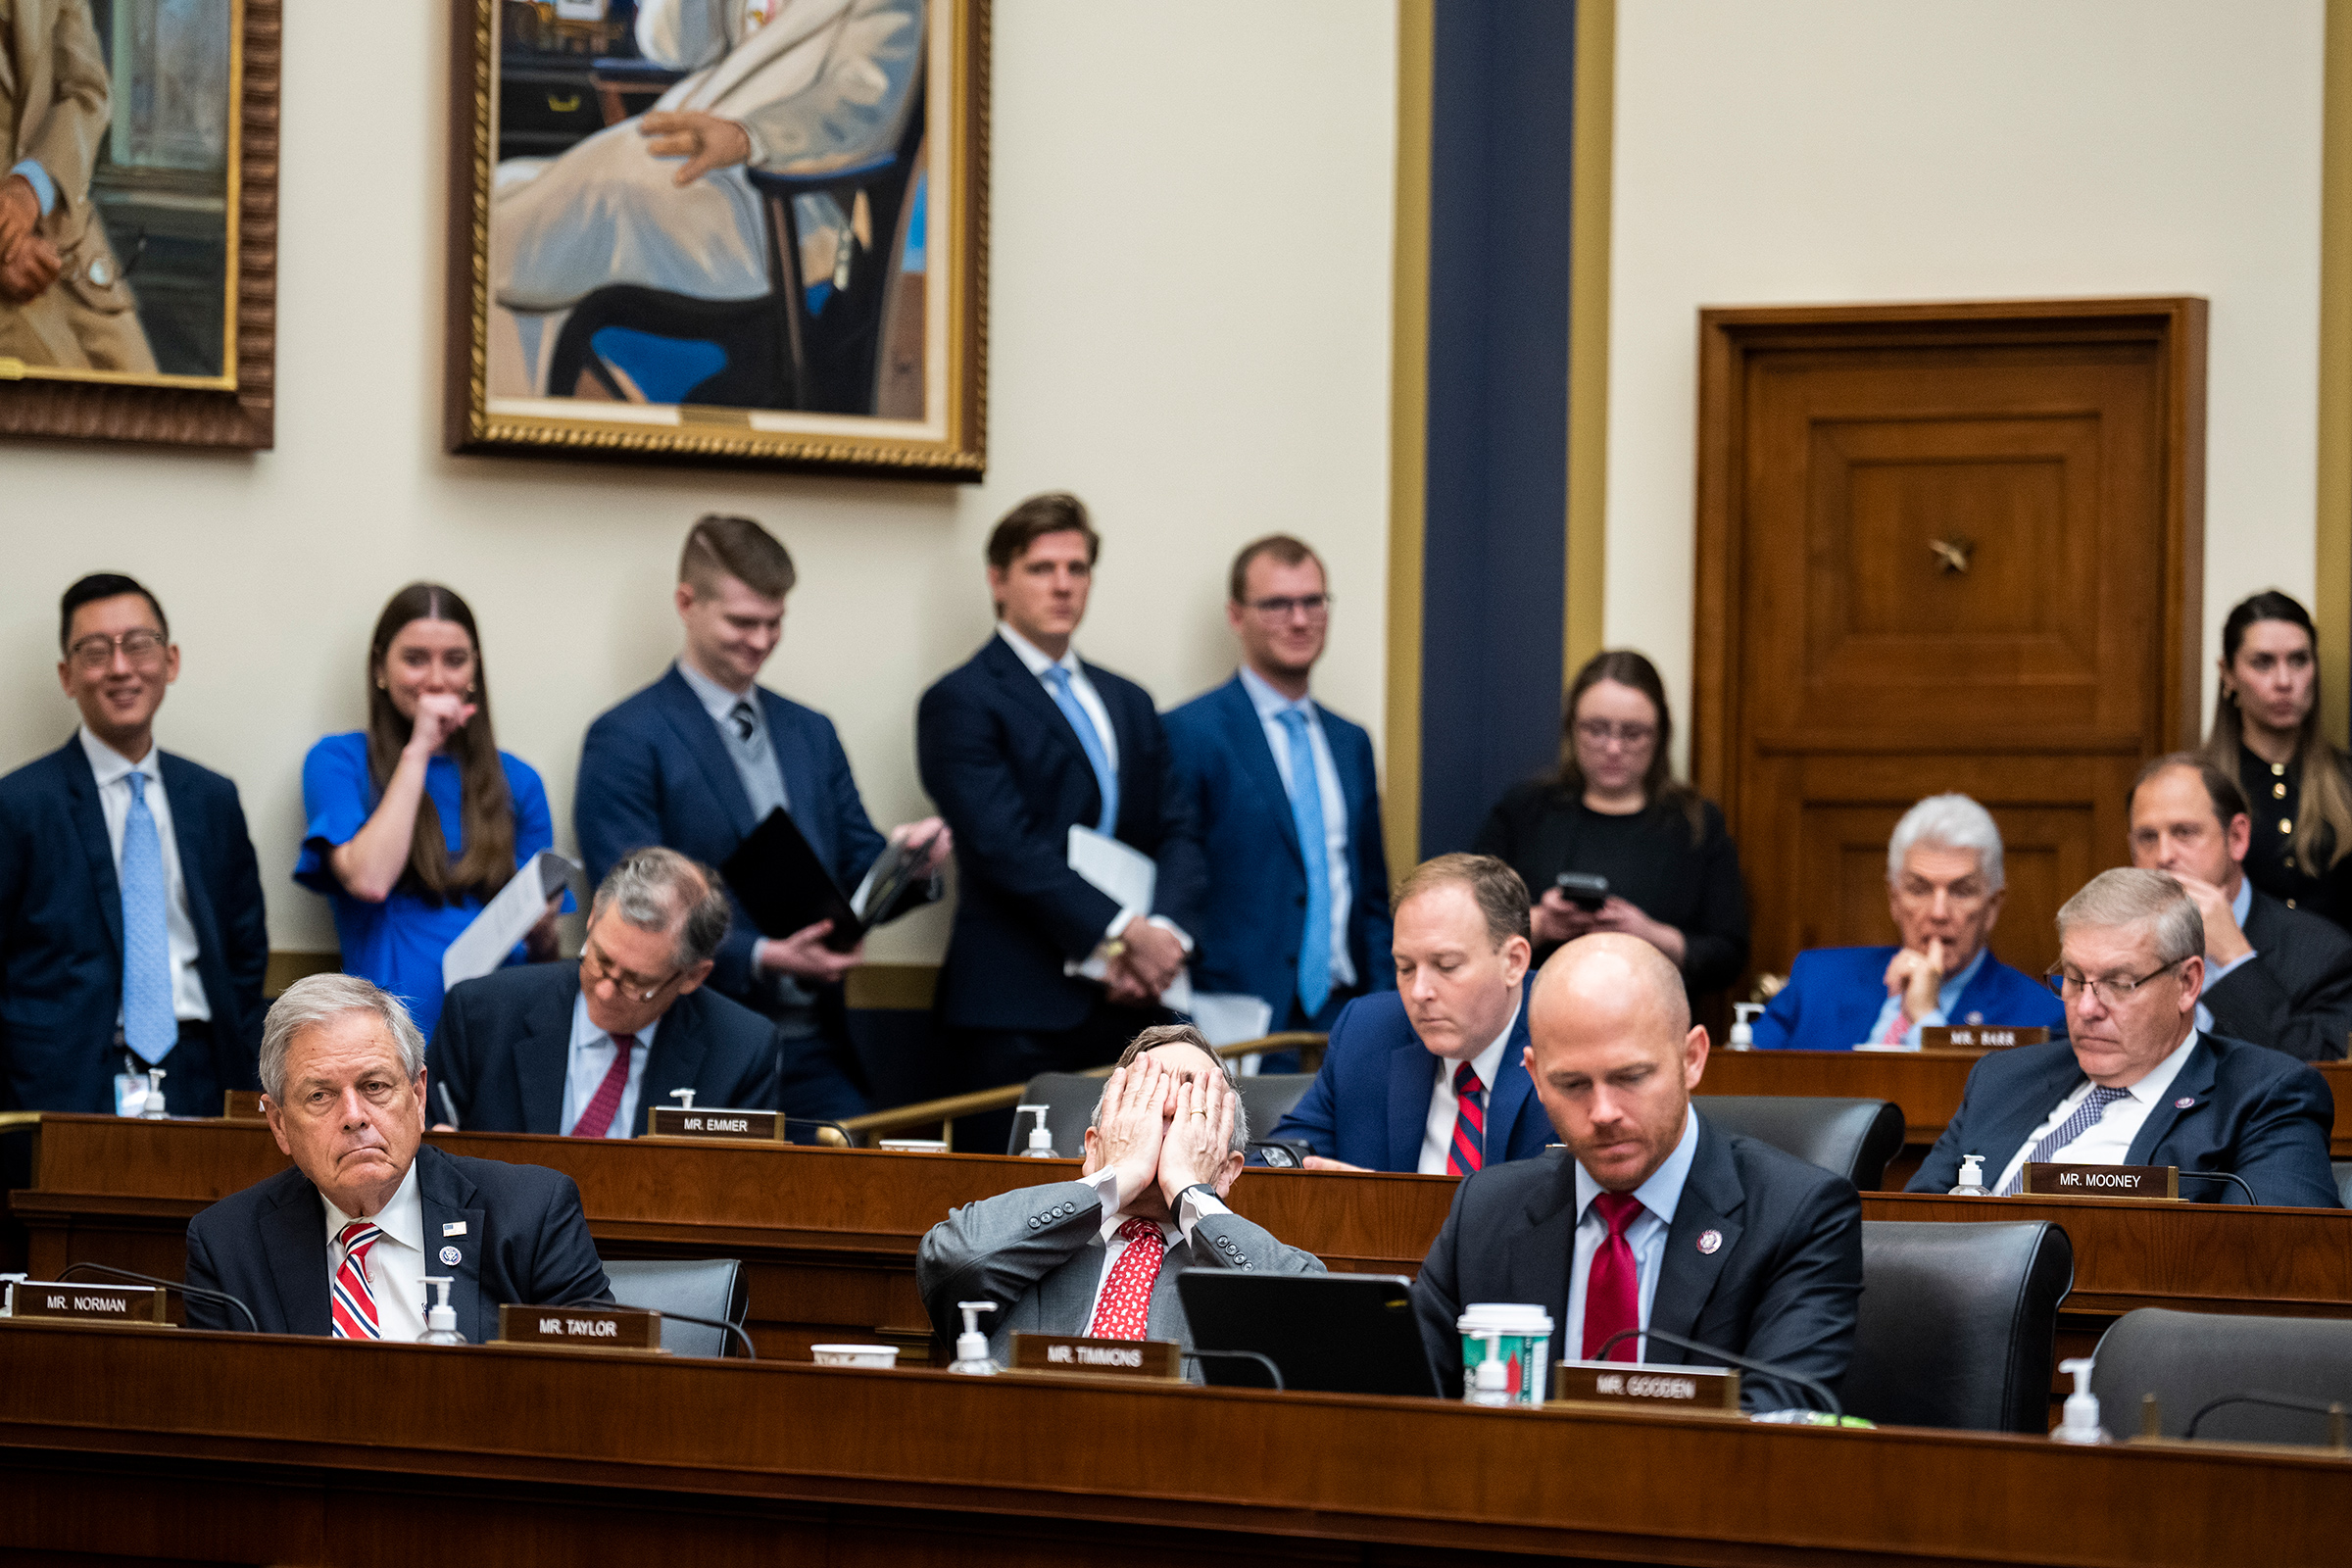 Rep. Van Taylor, R-Texas, reacts to the statement of John J. Ray III, CEO of FTX Group, that FTX used QuickBooks for accounting, during the House Financial Services Committee hearing titled "Investigating the Collapse of FTX, Part I," on Dec. 13, 2022. Ray took over after the resignation of Sam Bankman-Fried. (Tom Williams—CQ Roll Call/AP)